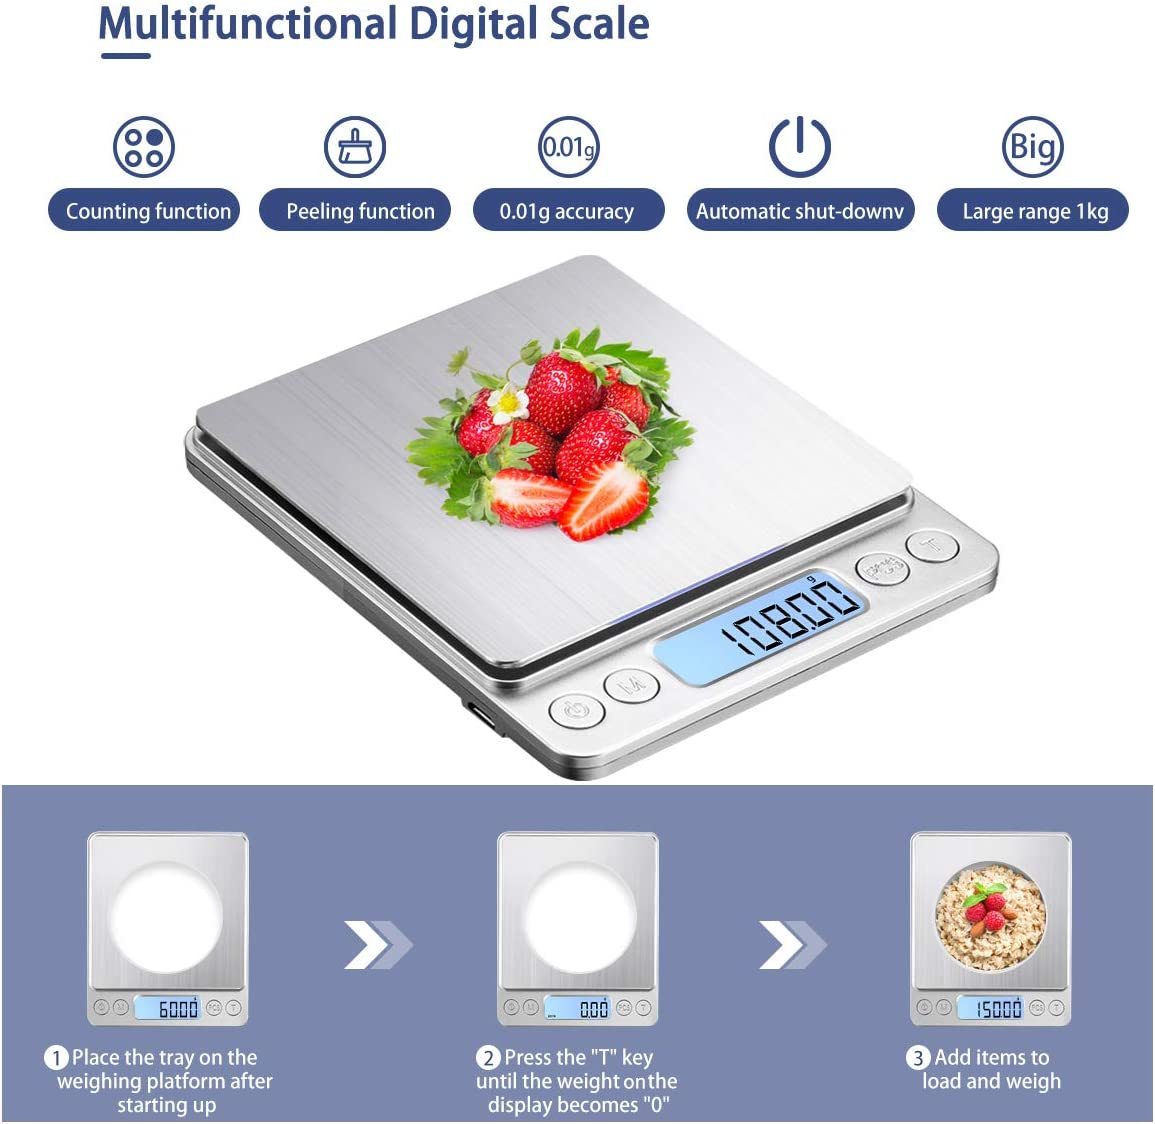 JHSCALE Digital Gram Scale 500g/0.01g Mini Pocket Jewelry Scale Food Scale  High Precision with Backlit LCD Display Digital Weight OZ for